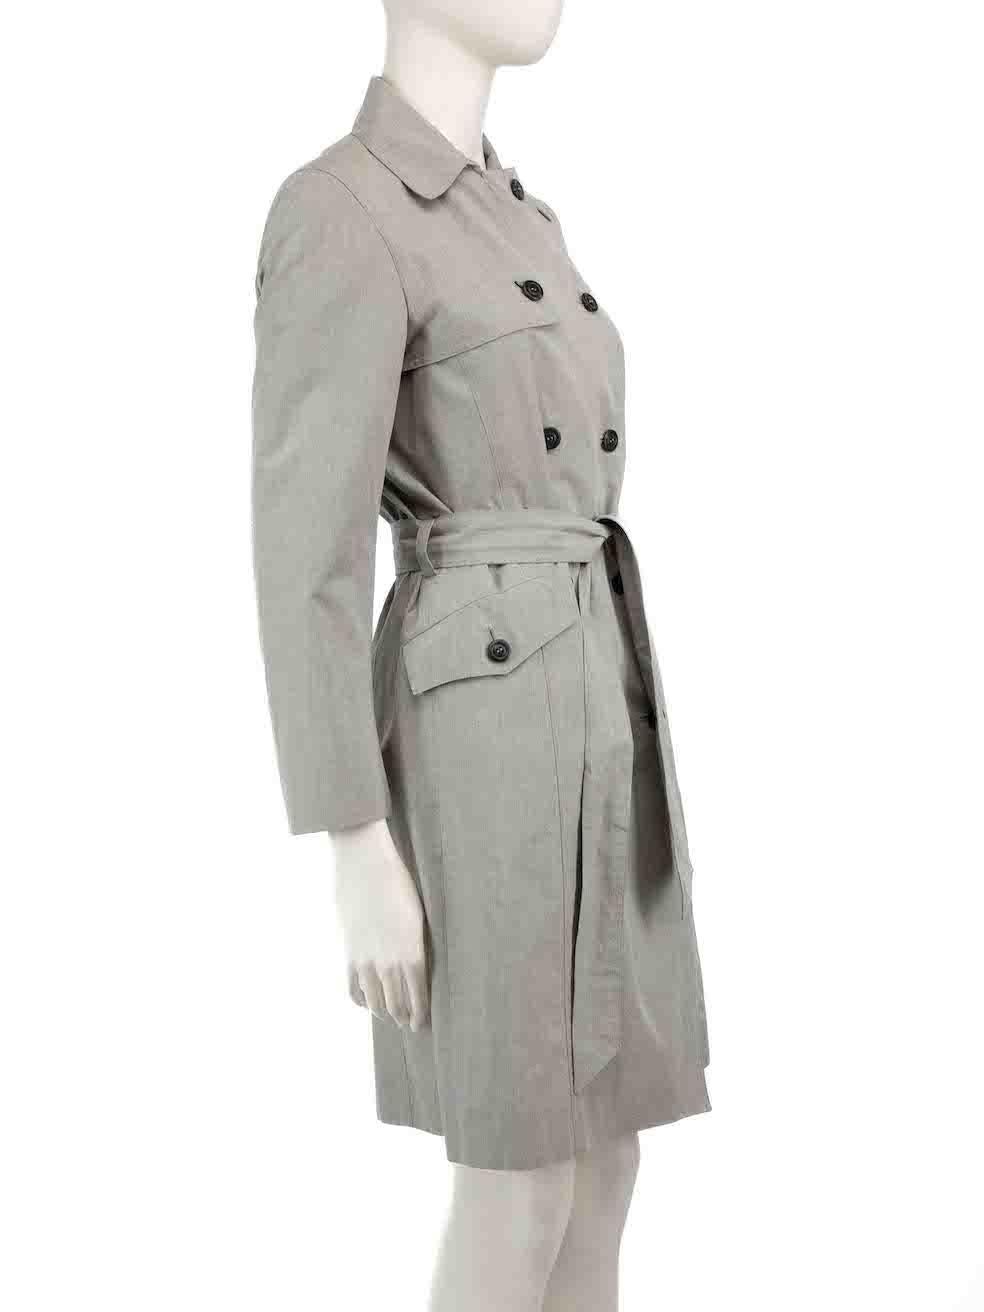 CONDITION is Very good. Hardly any visible wear to coat is evident on this used Luciano Barbera designer resale item.
 
 
 
 Details
 
 
 Grey
 
 Cotton
 
 Trench coat
 
 Button fastening
 
 Double breasted
 
 Belted
 
 2x Side pockets
 
 
 
 
 
